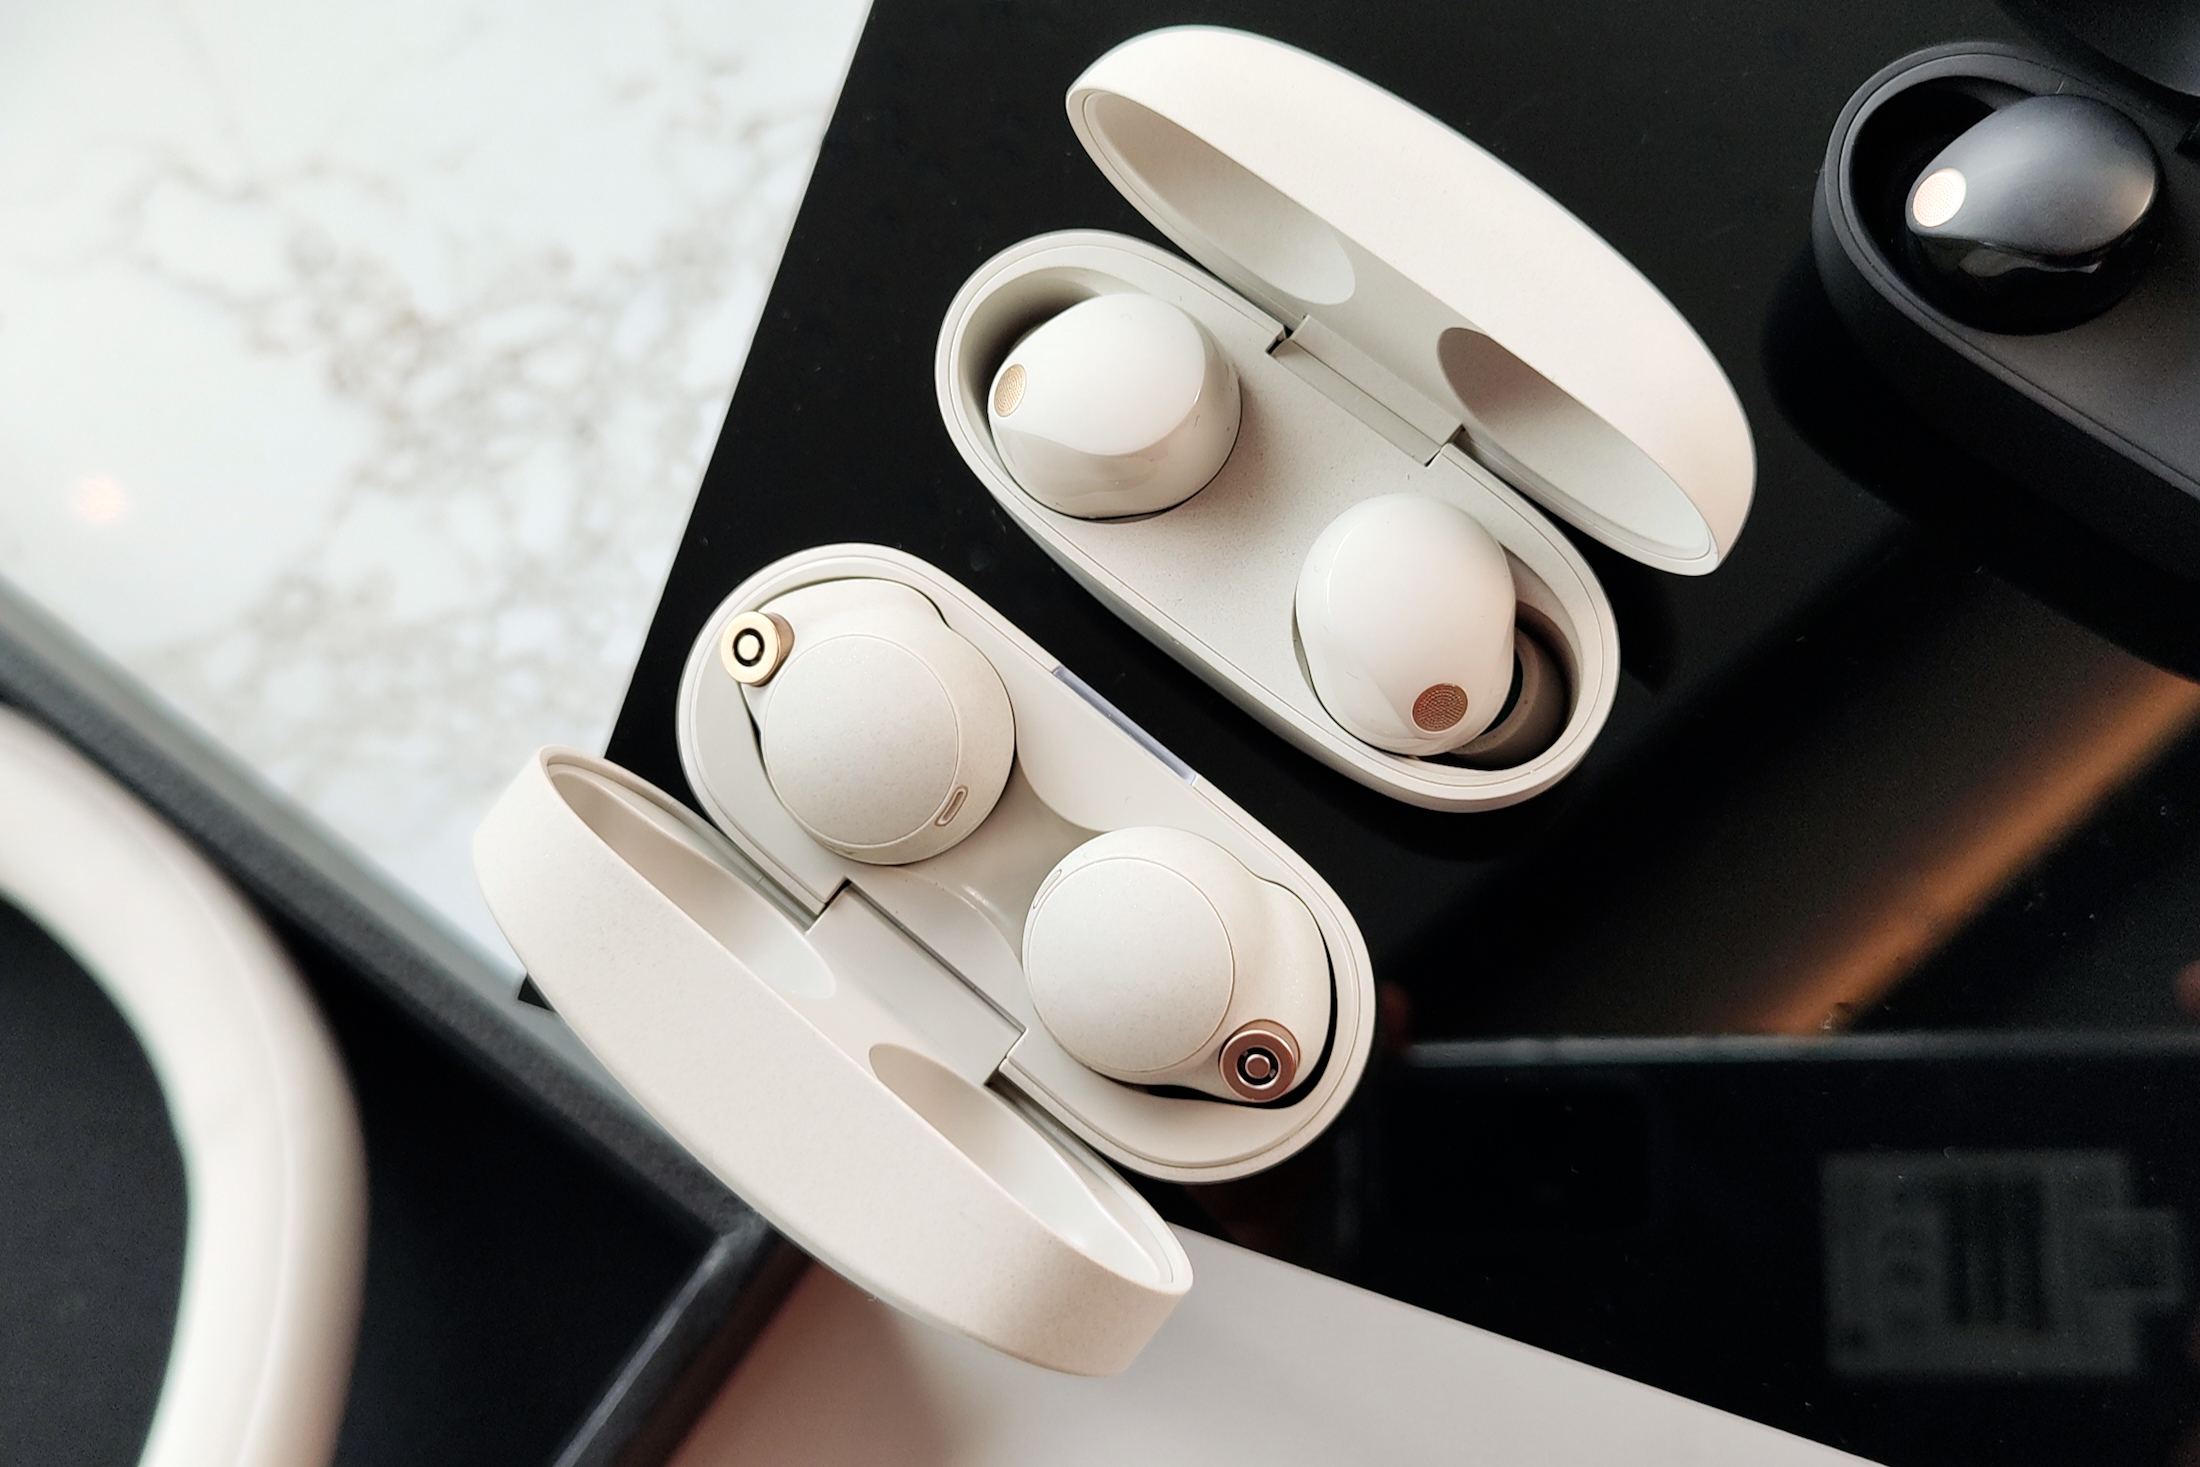 Sony WF-1000XM5 noise-canceling earbuds review: better in every